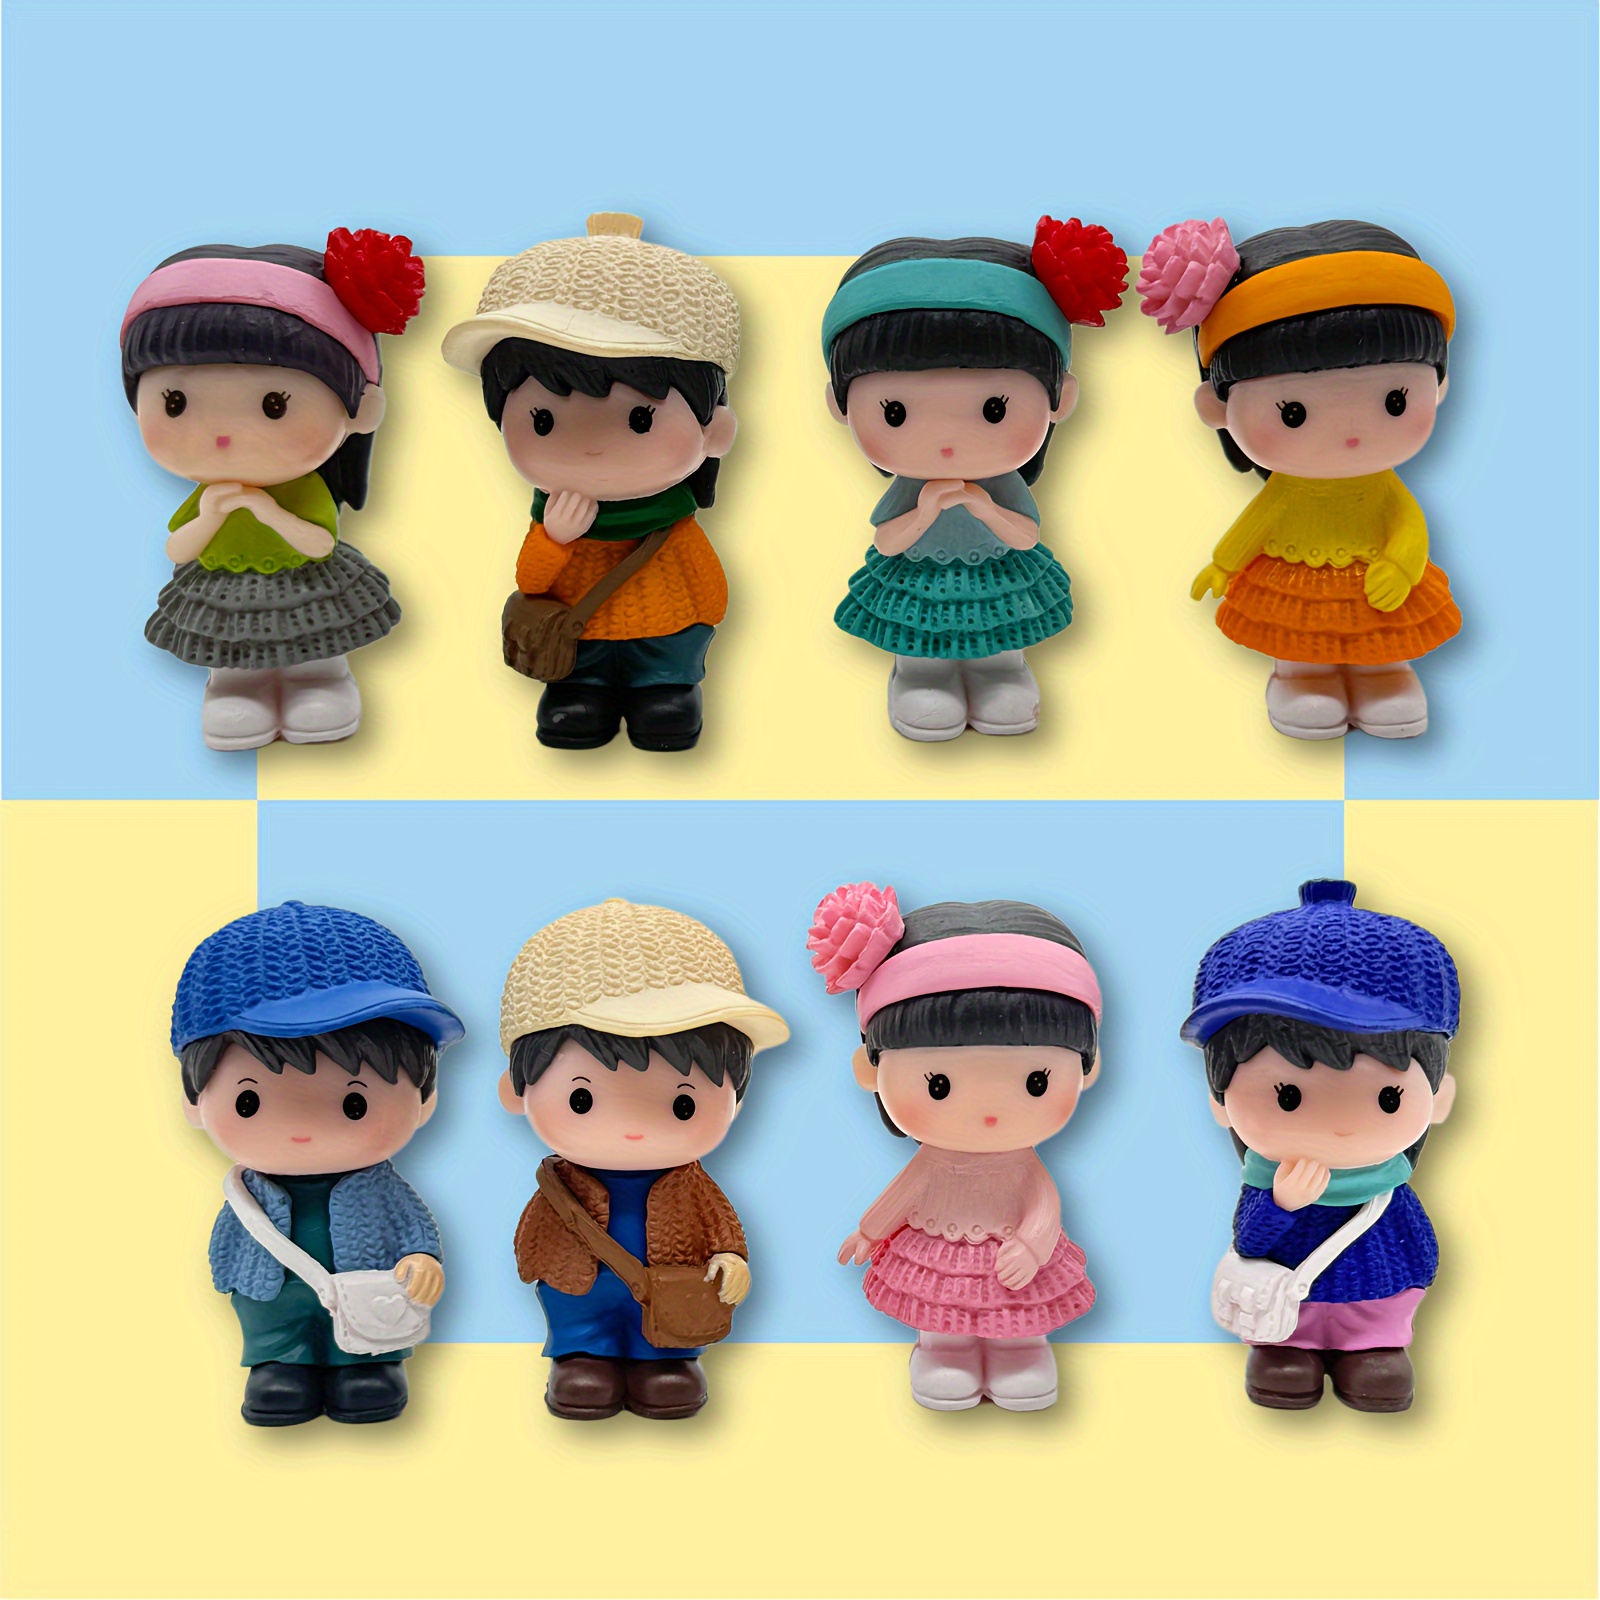 

8pcs/set, Miniature Boy Girl Ornaments Cake Topper, Boy And Girl Statue Kawaii Boy Girl Doll Set, Resin Crafts Ornaments For Patio, Lawn, Yard Art Decoration, Easter Egg Fillers